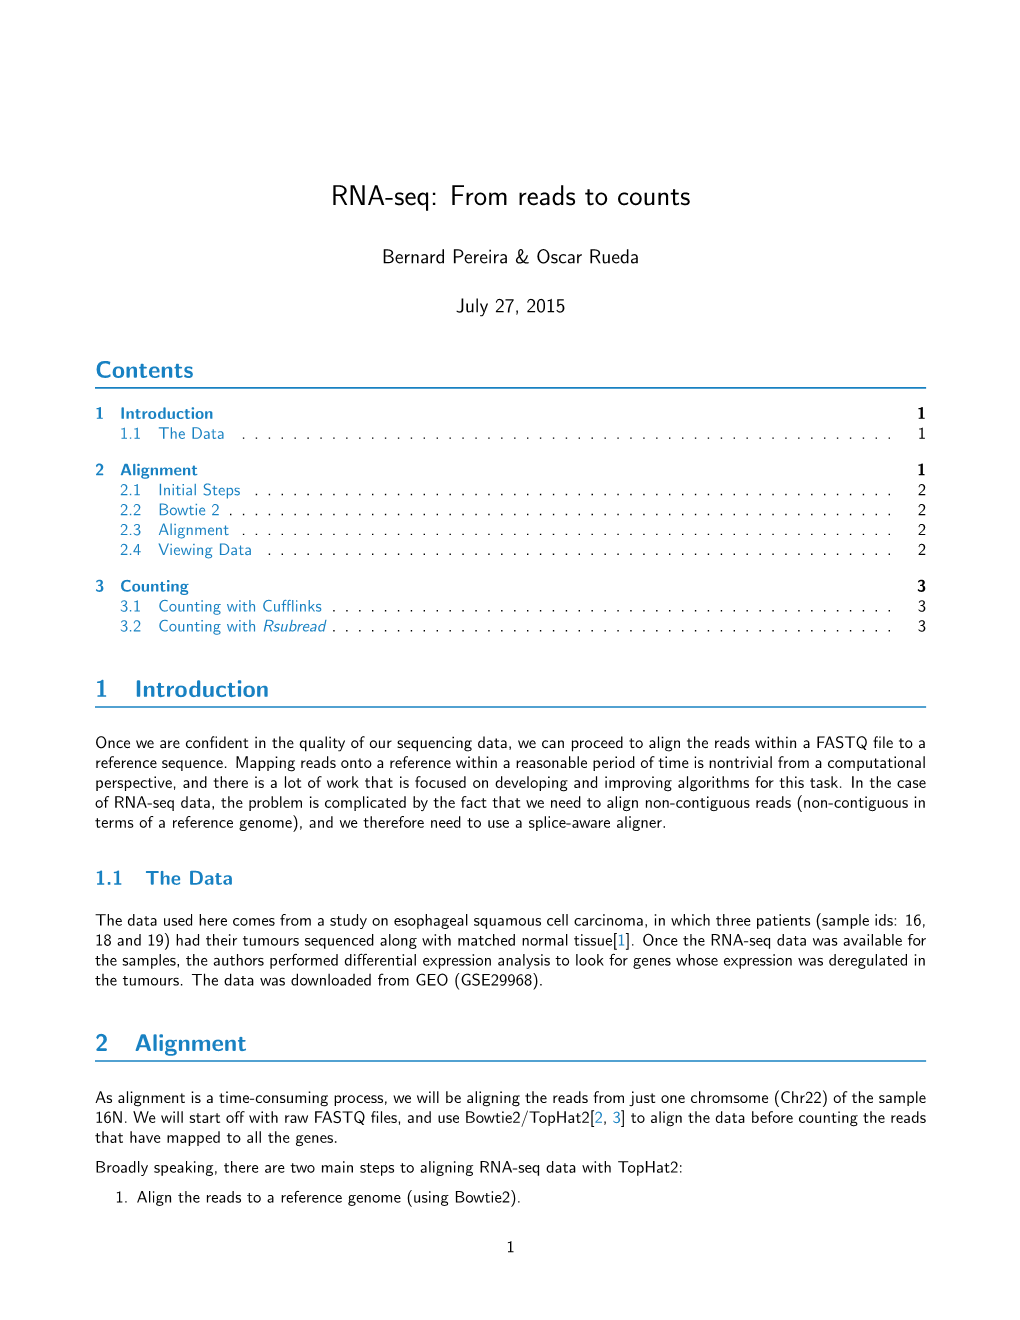 RNA-Seq: from Reads to Counts